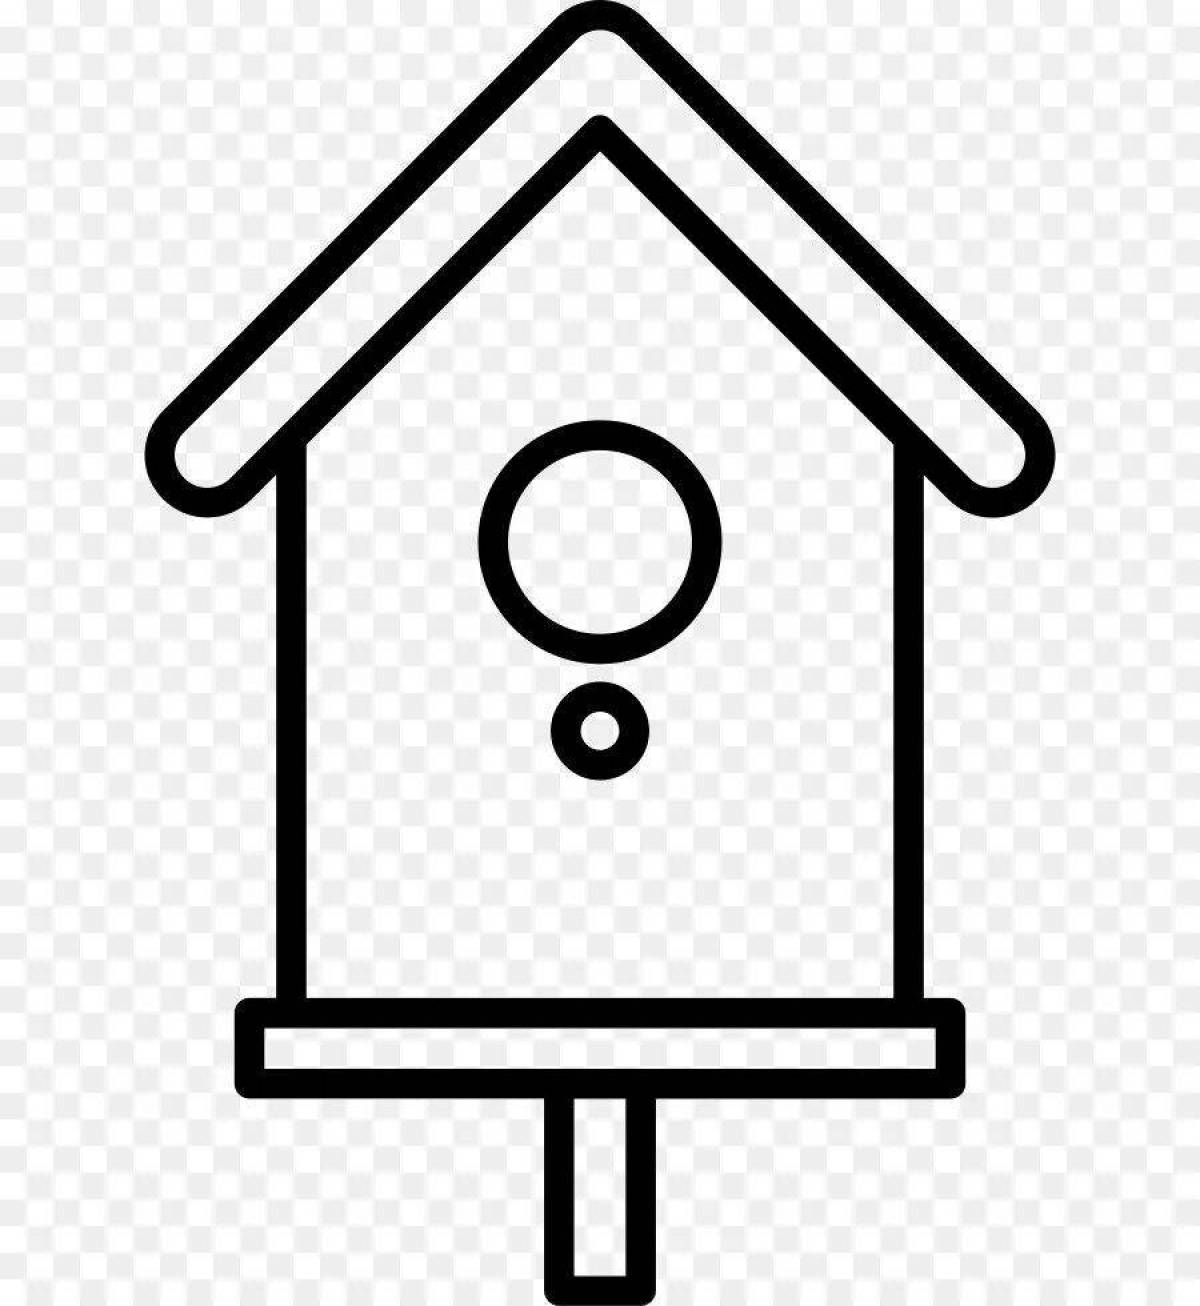 Colorful birdhouse coloring page for kids